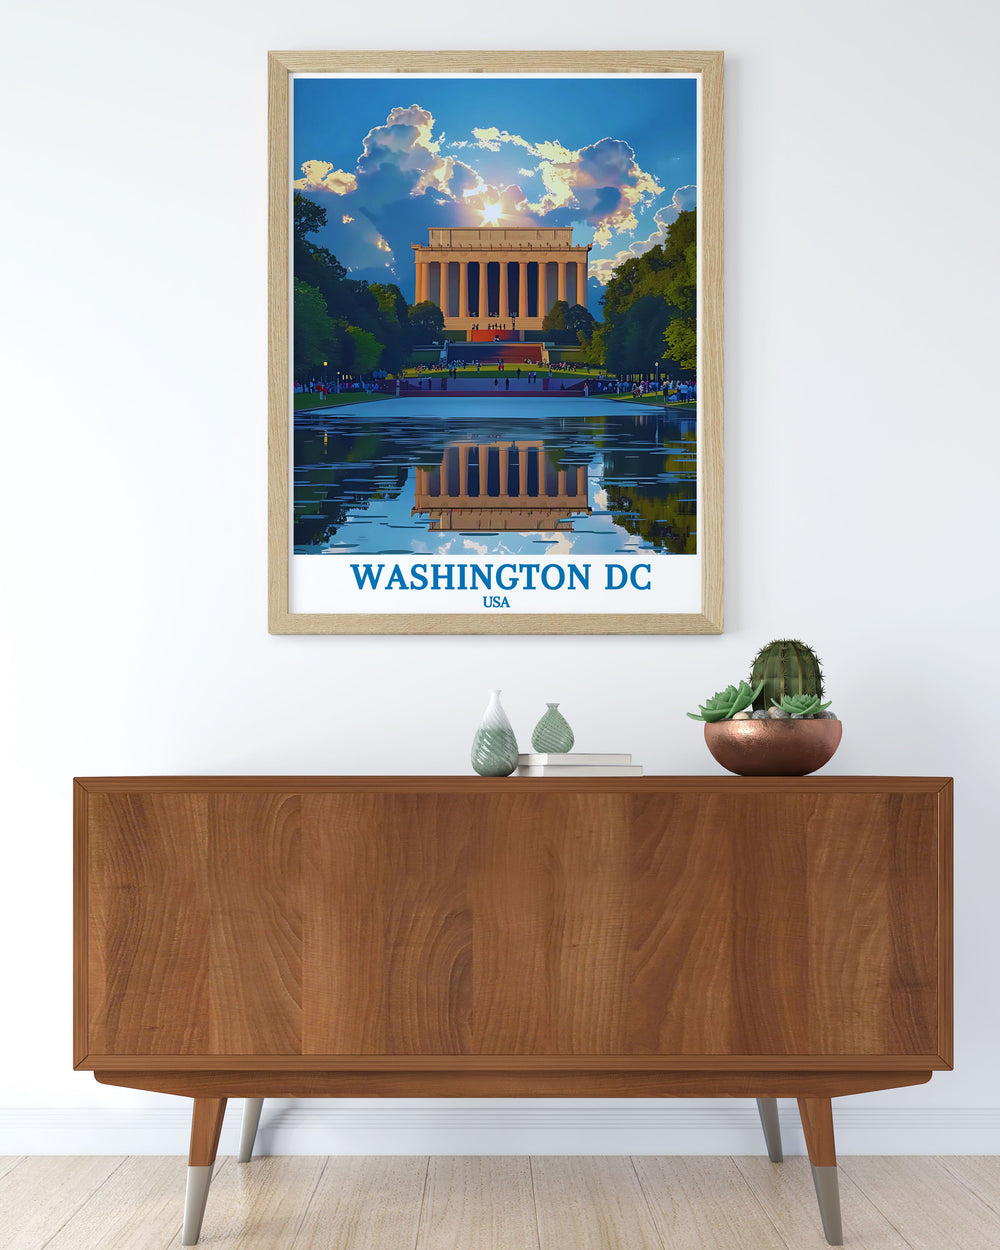 Elegant Washington DC art print showcasing The Lincoln Memorial ideal for adding a touch of sophistication to your living room or office space